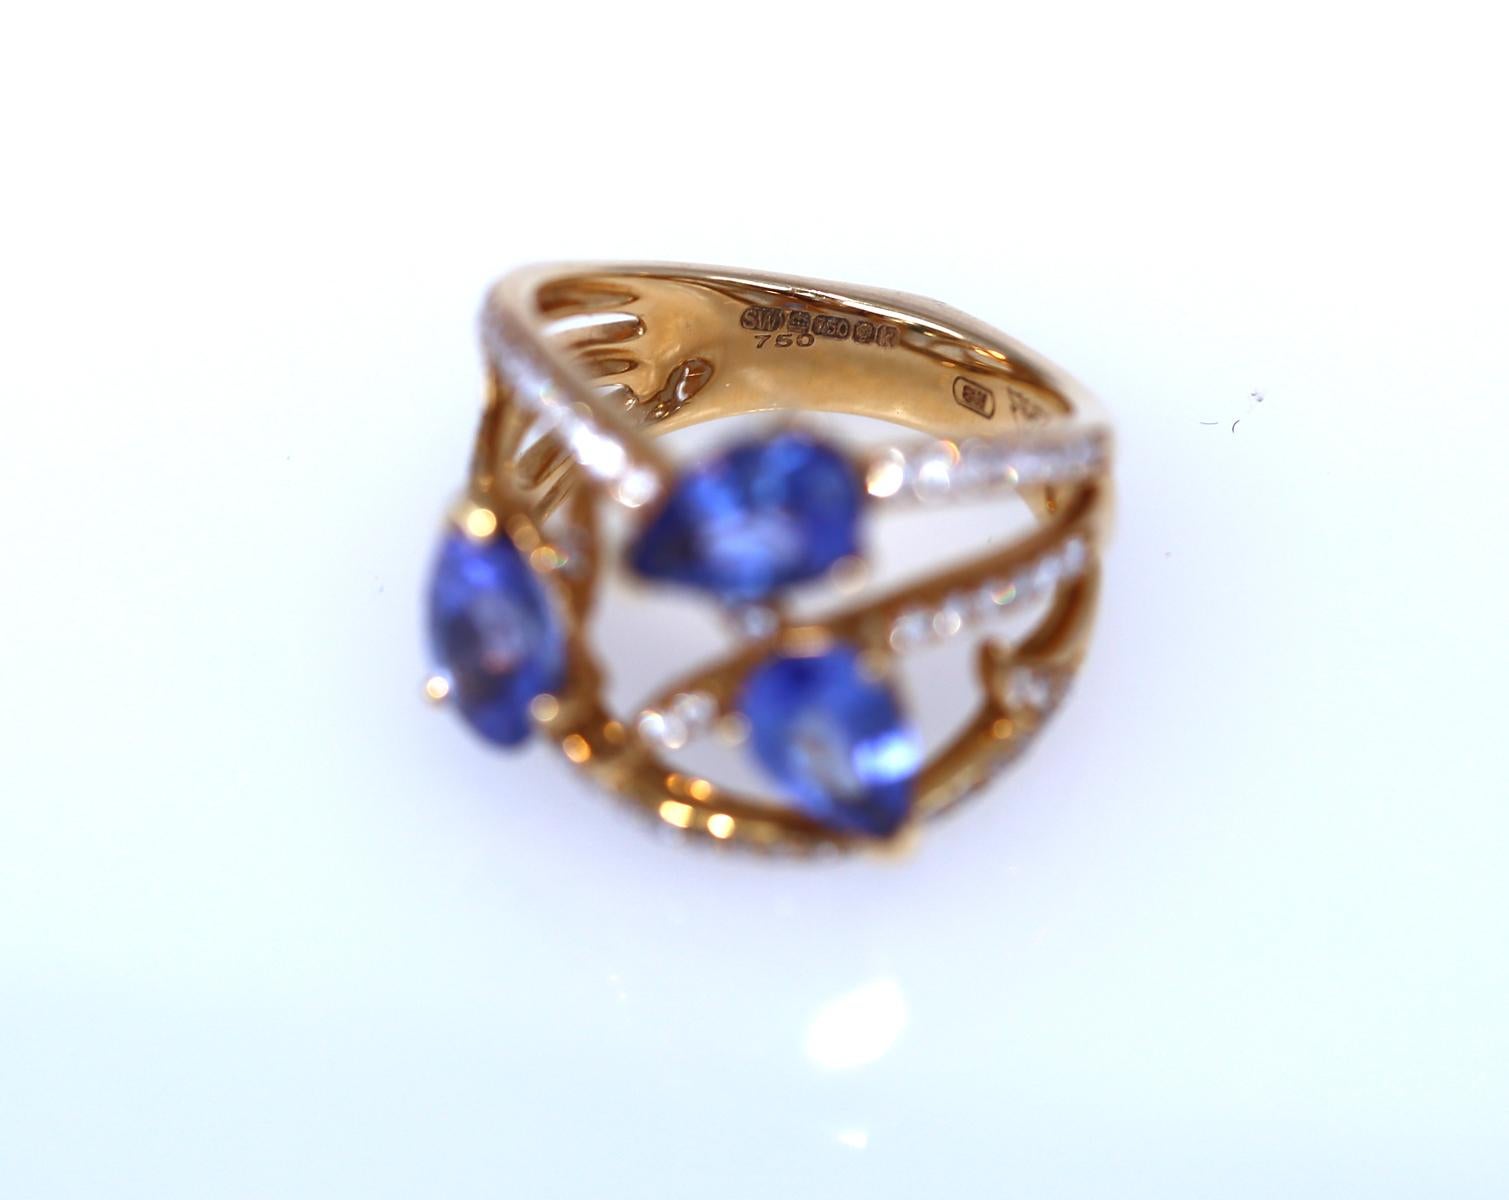 Stephen Webster Tanzanite Diamonds Ring Signed Yellow Gold 18K, 2010 In Good Condition For Sale In Herzelia, Tel Aviv